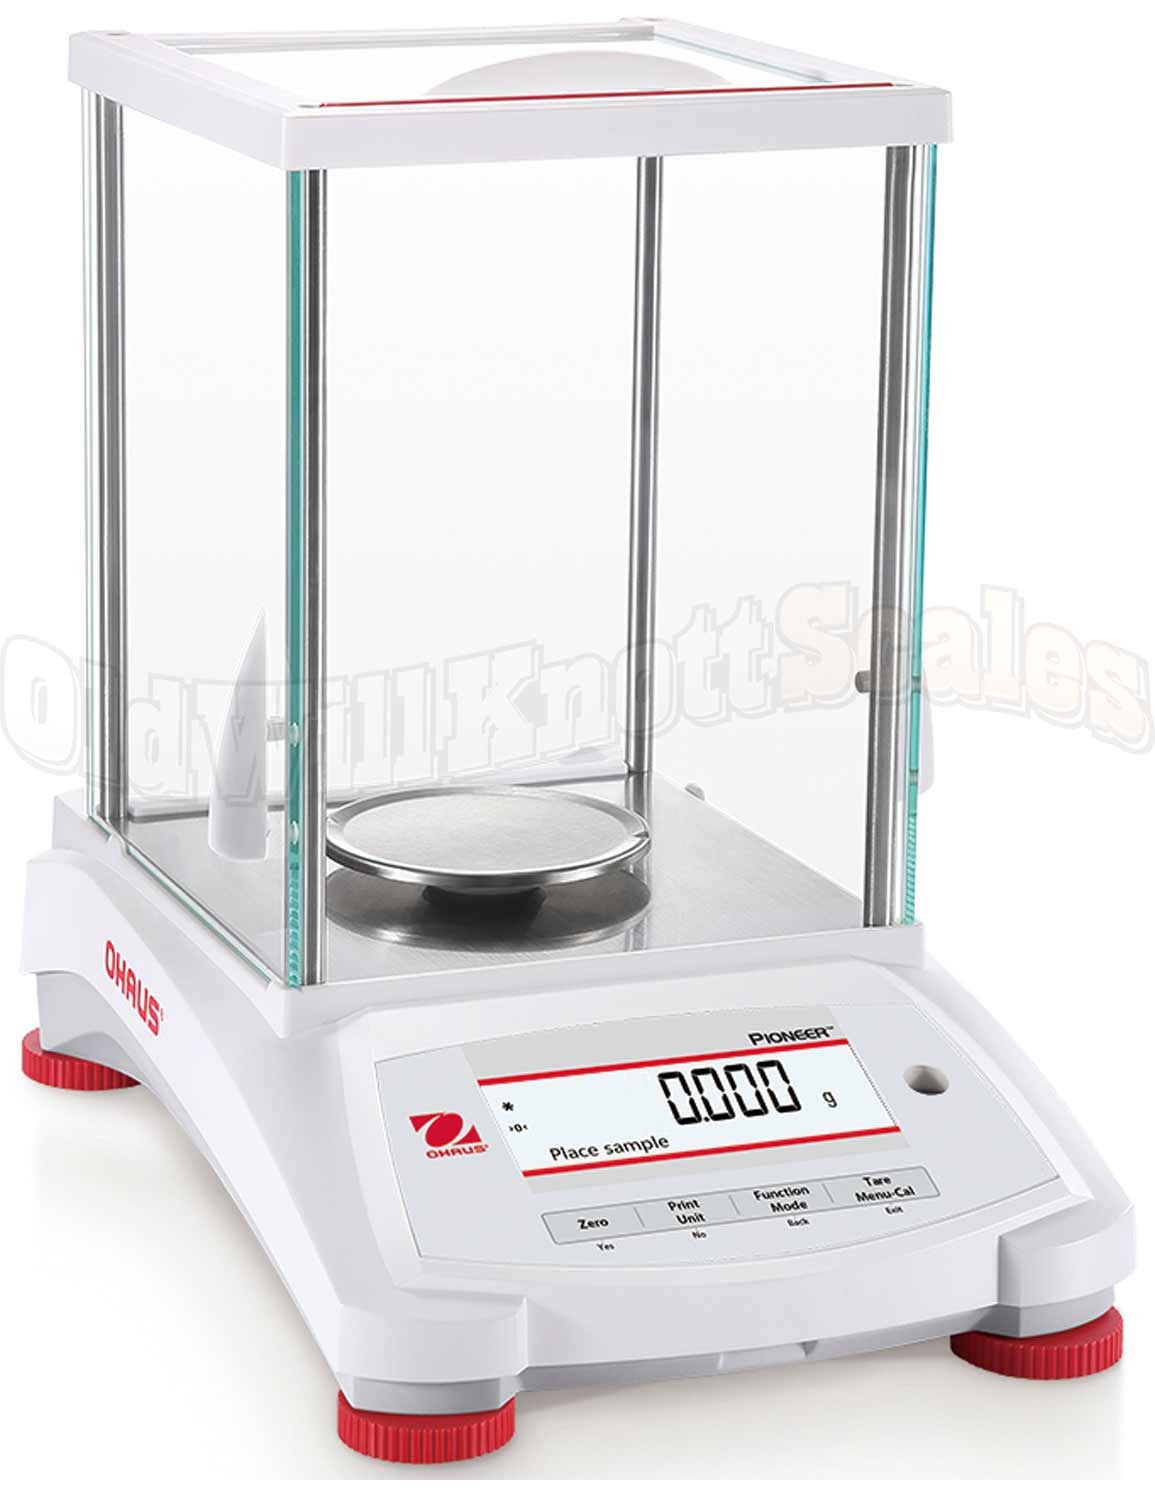 http://www.oldwillknottscales.com/assets/images/ohaus/pioneer_px_milligram_0.001_front_large.jpg